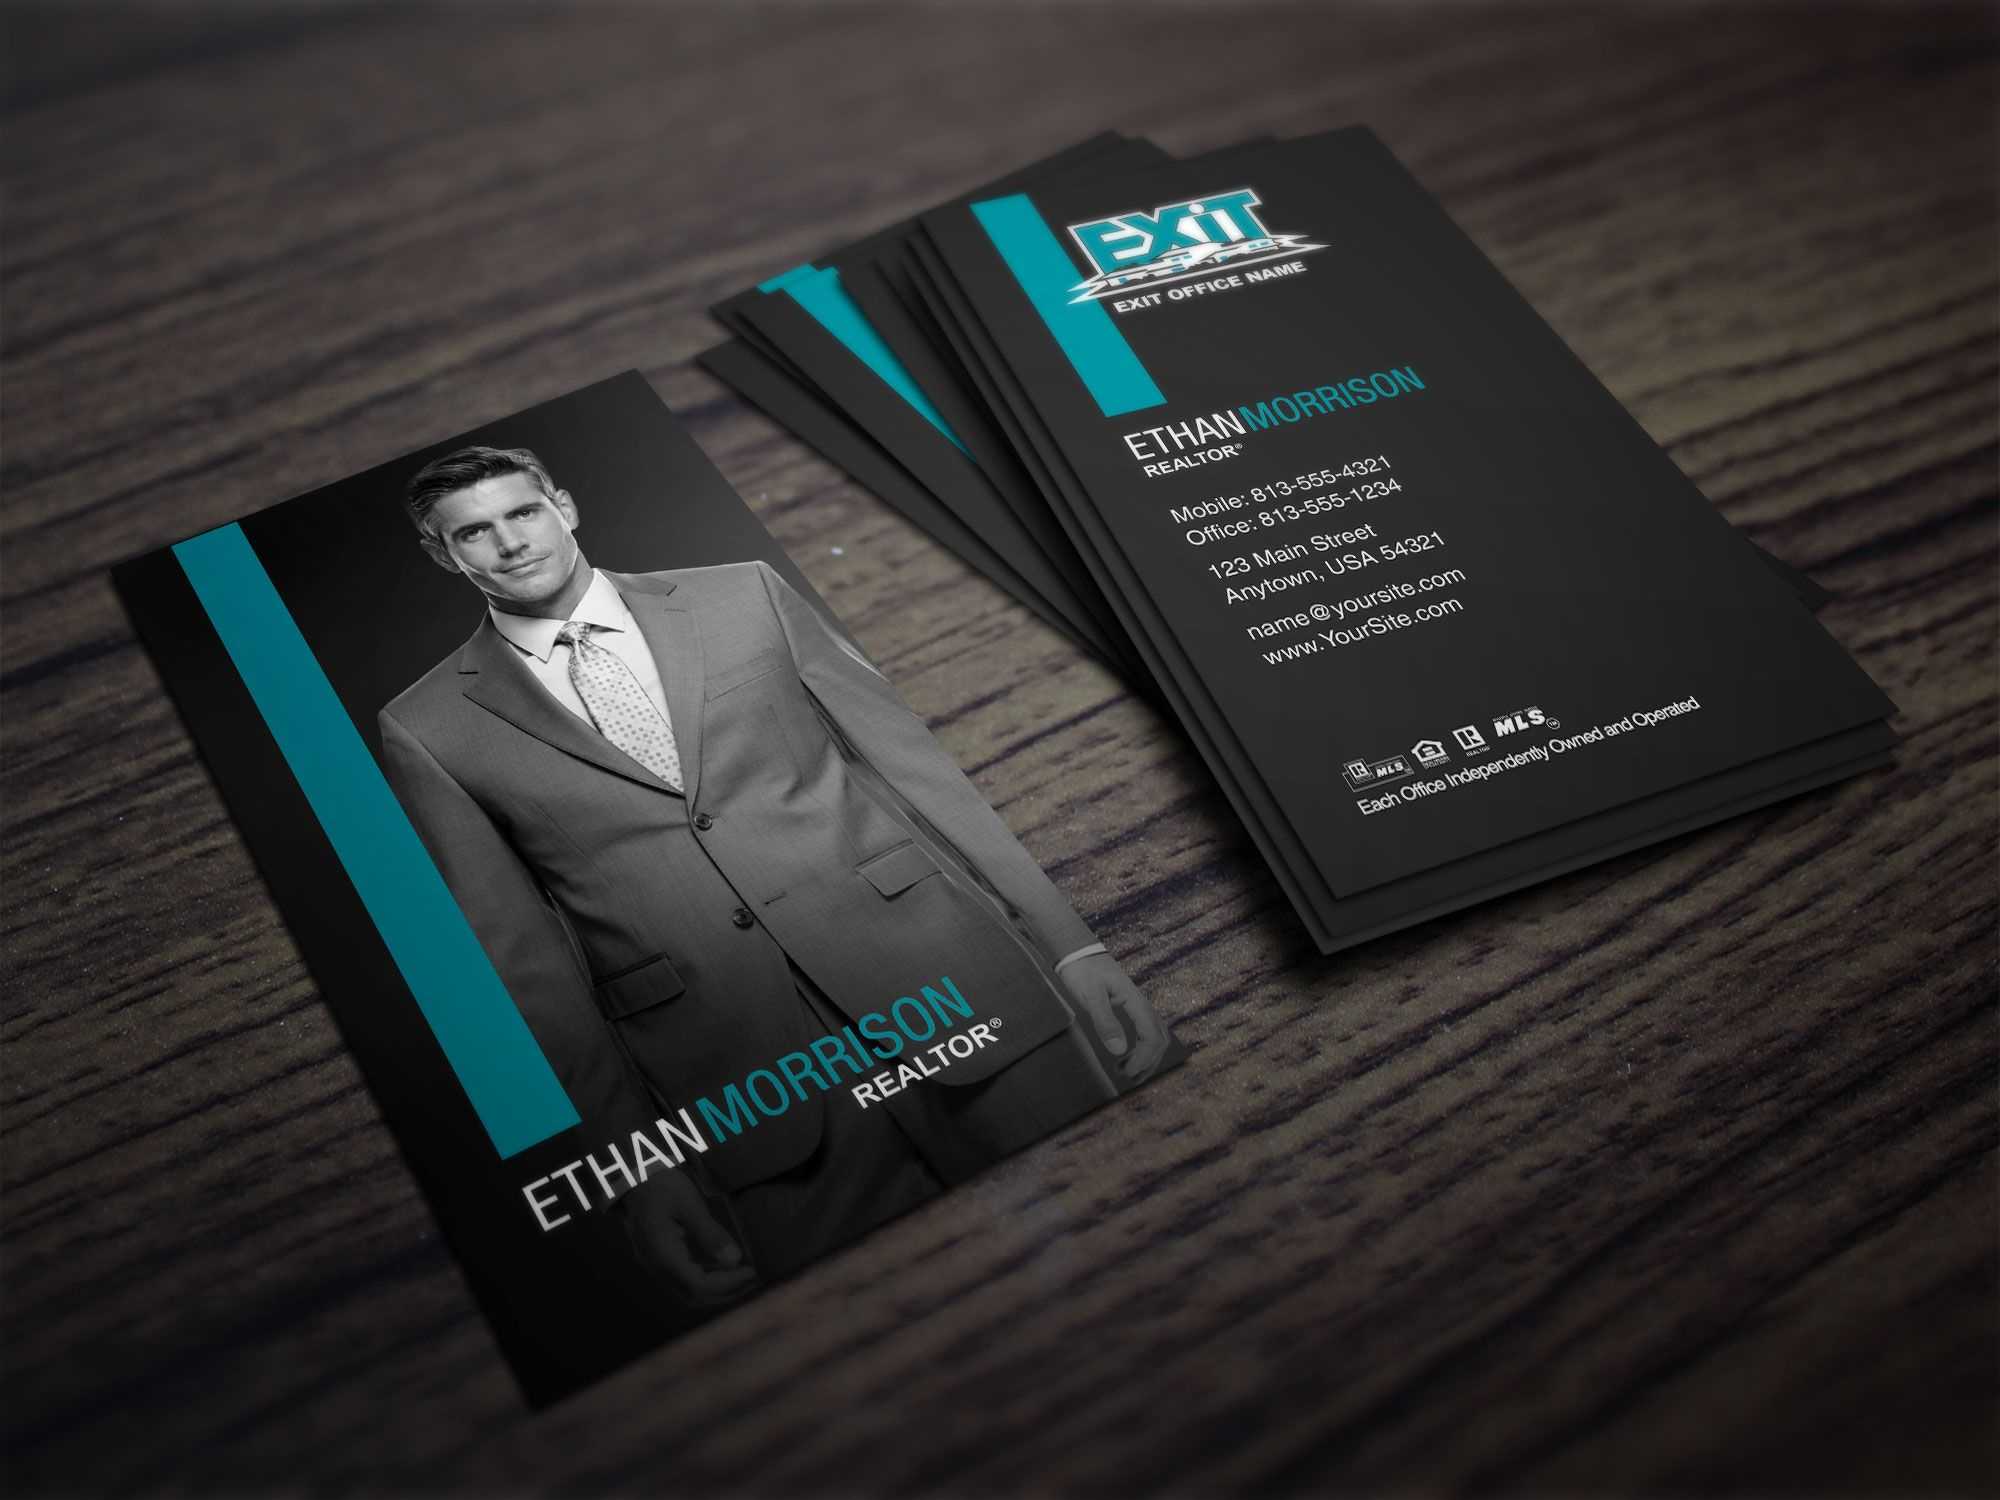 Clean, Dark Exit Realty Business Card Design For Realtors With Coldwell Banker Business Card Template